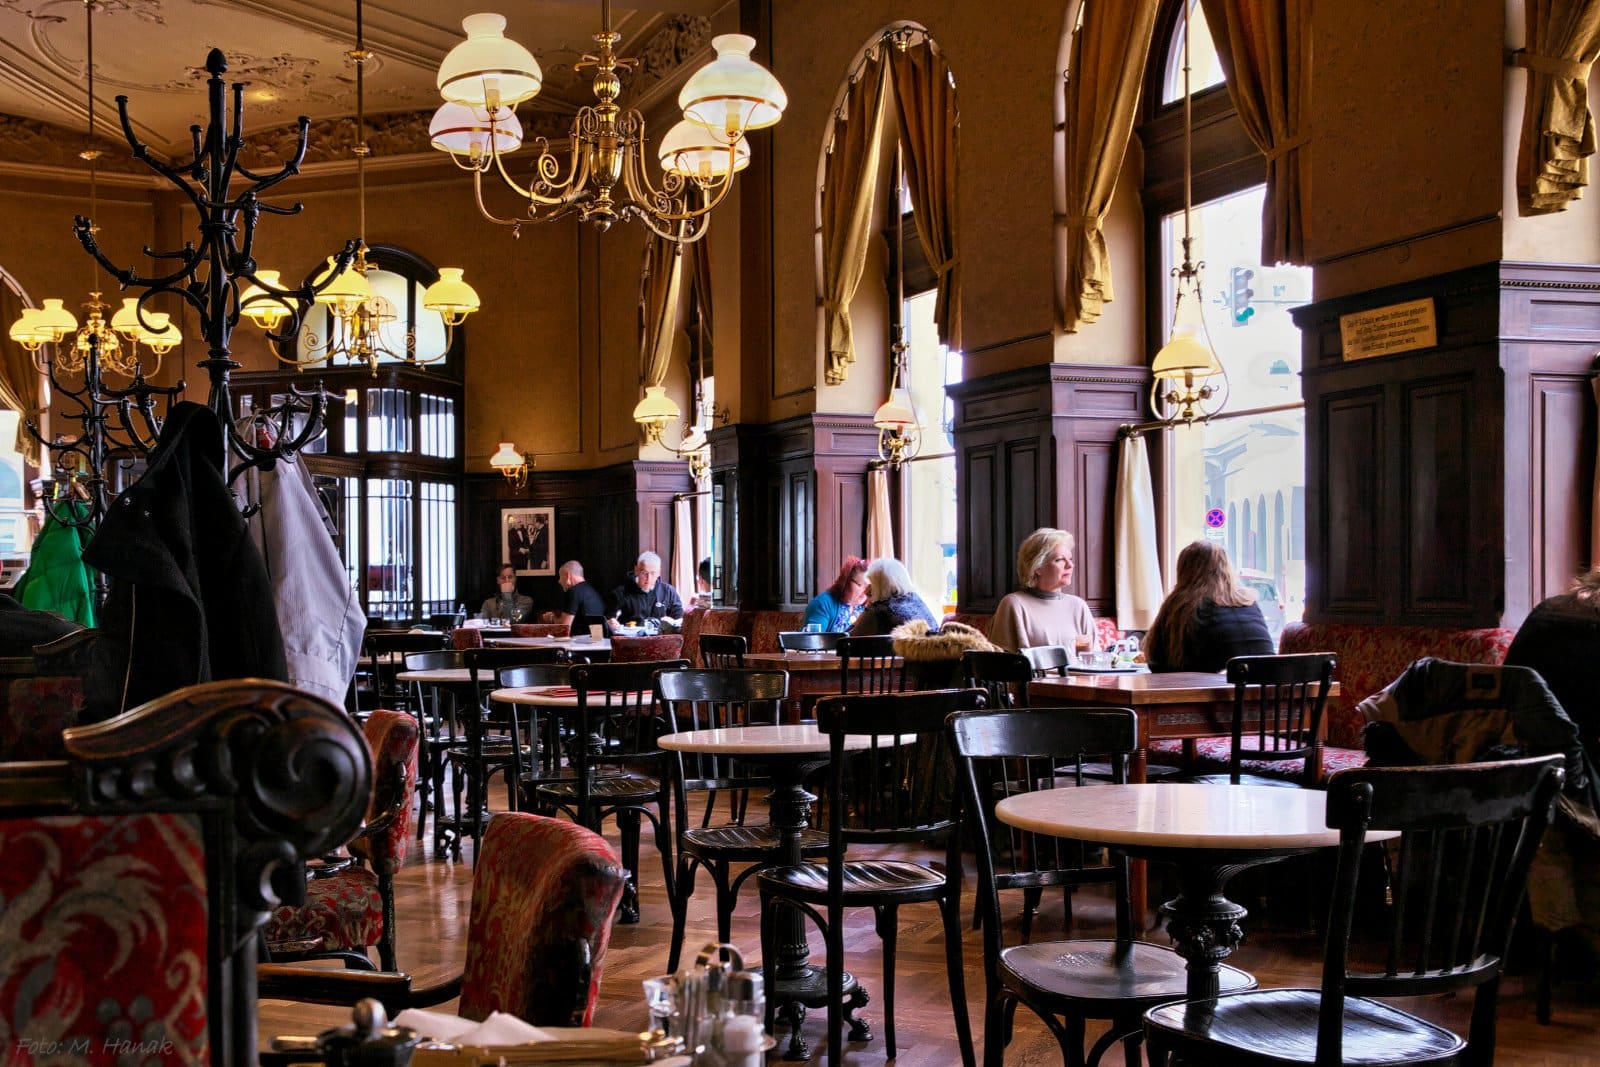 <p><span>Vienna’s coffee culture is steeped in history and elegance. The city’s traditional coffeehouses, recognized by UNESCO for their cultural significance, are institutions where time seems to slow down.</span></p> <p><span>As you step into a Viennese café, you’re entering a world where coffee is served with a glass of water, and the atmosphere encourages relaxation and contemplation. These coffeehouses offer a variety of traditional coffee preparations, from a creamy Melange to an Einspänner.</span></p> <p><b>Insider’s Tip: </b><span>Visit Café Central or Café Sacher for a quintessential Viennese coffee experience complete with classic pastries.</span></p> <p><b>When To Travel: </b><span>Spring (April to June) and fall (September to October) offer mild weather and fewer tourists.</span></p> <p><b>How To Get There: </b><span>Fly into Vienna International Airport, with the city center easily accessible via train, bus, or taxi.</span></p>